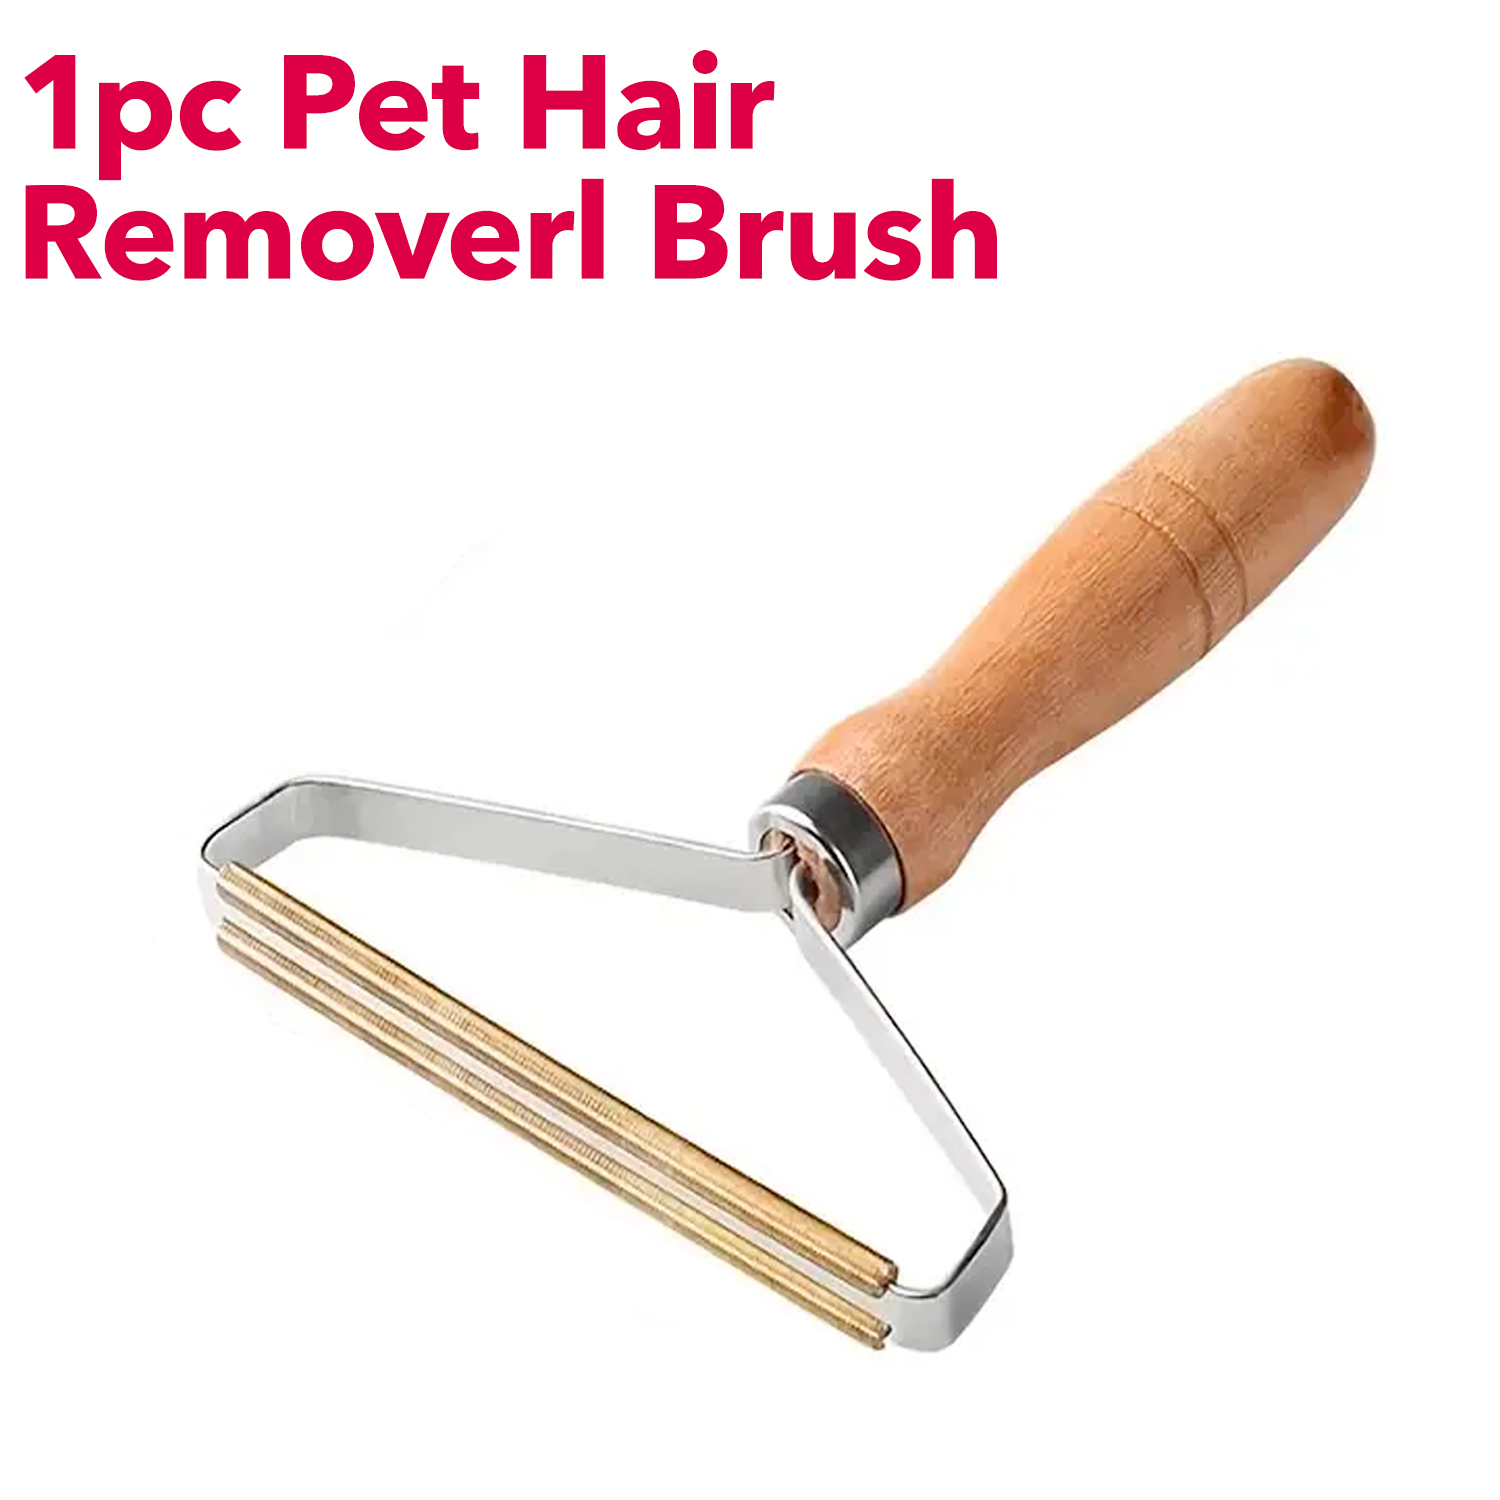 1 Pieces Pet Hair Remover Brush For Dog & Cat Dog Hair Removal Brush With Wood Handle For Clothes and Blankets